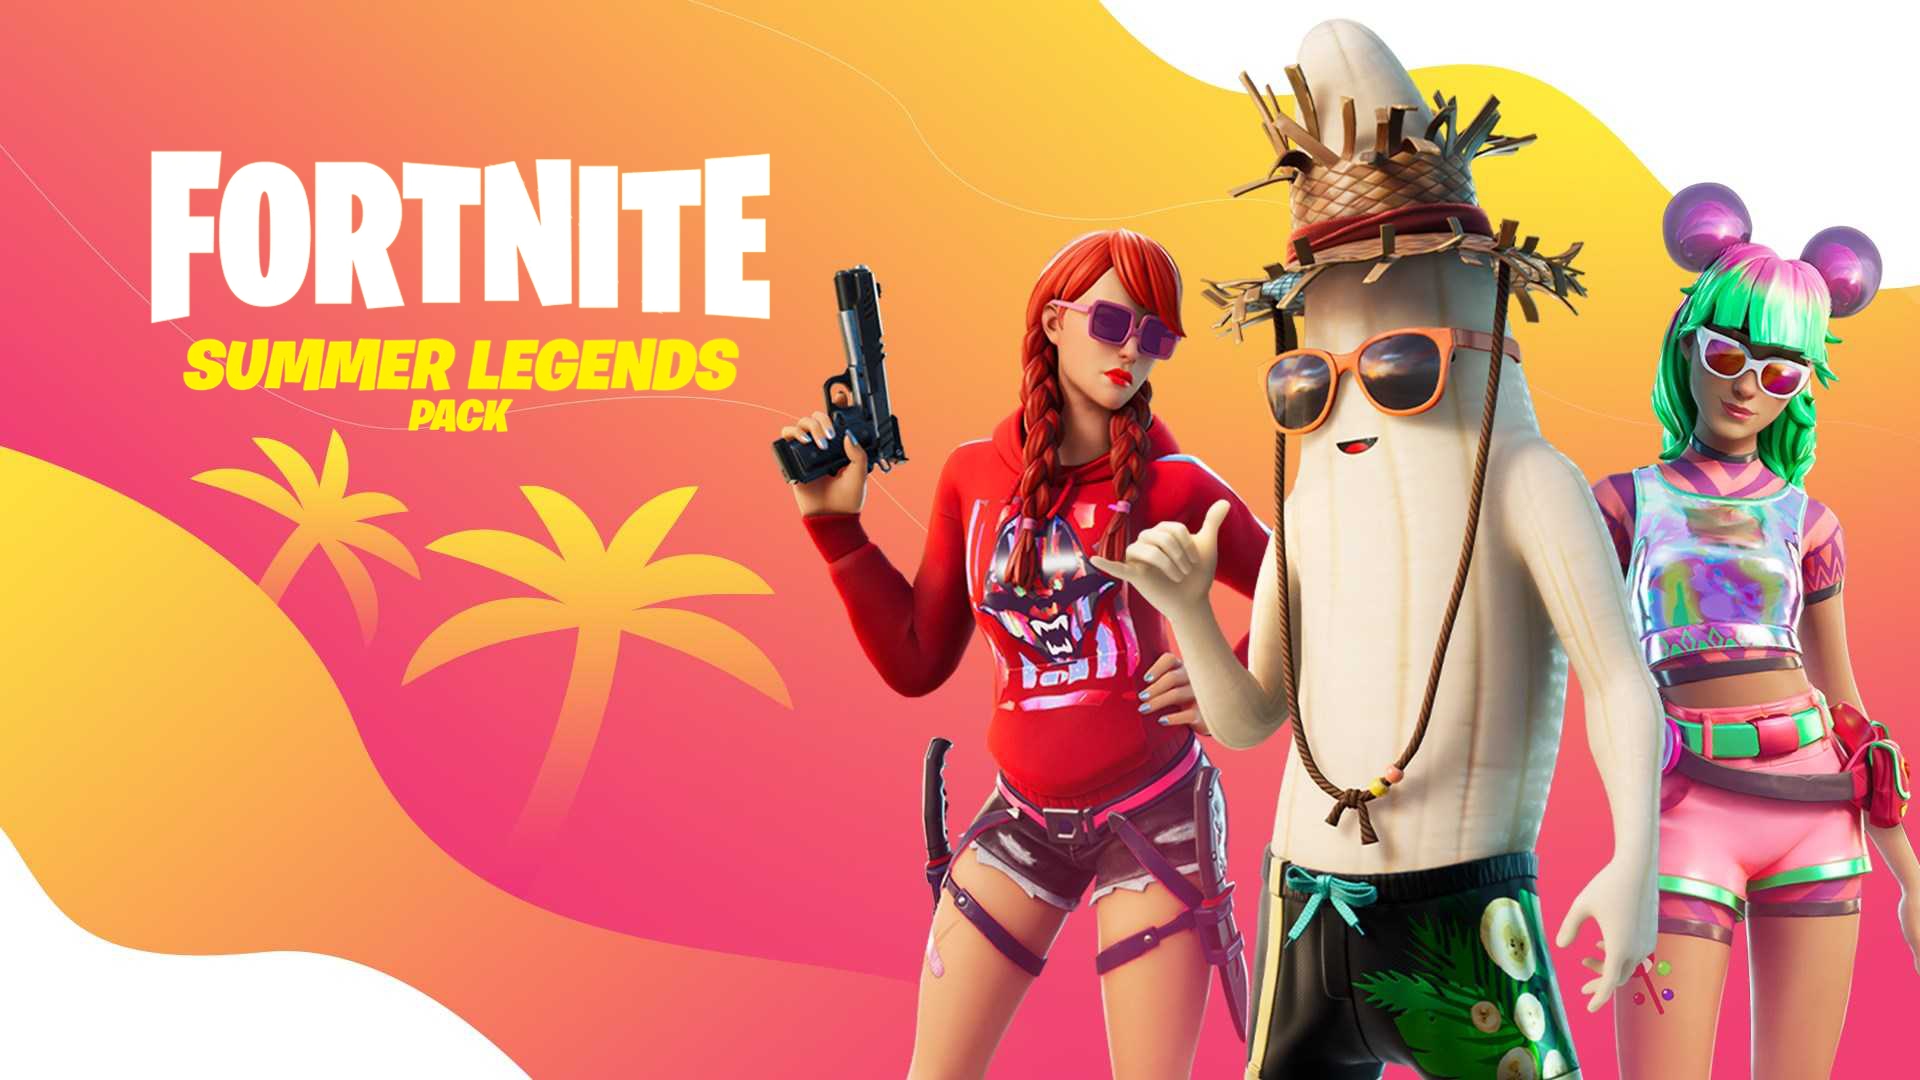 Fortnite: The Minty Legends Pack Xbox Series X